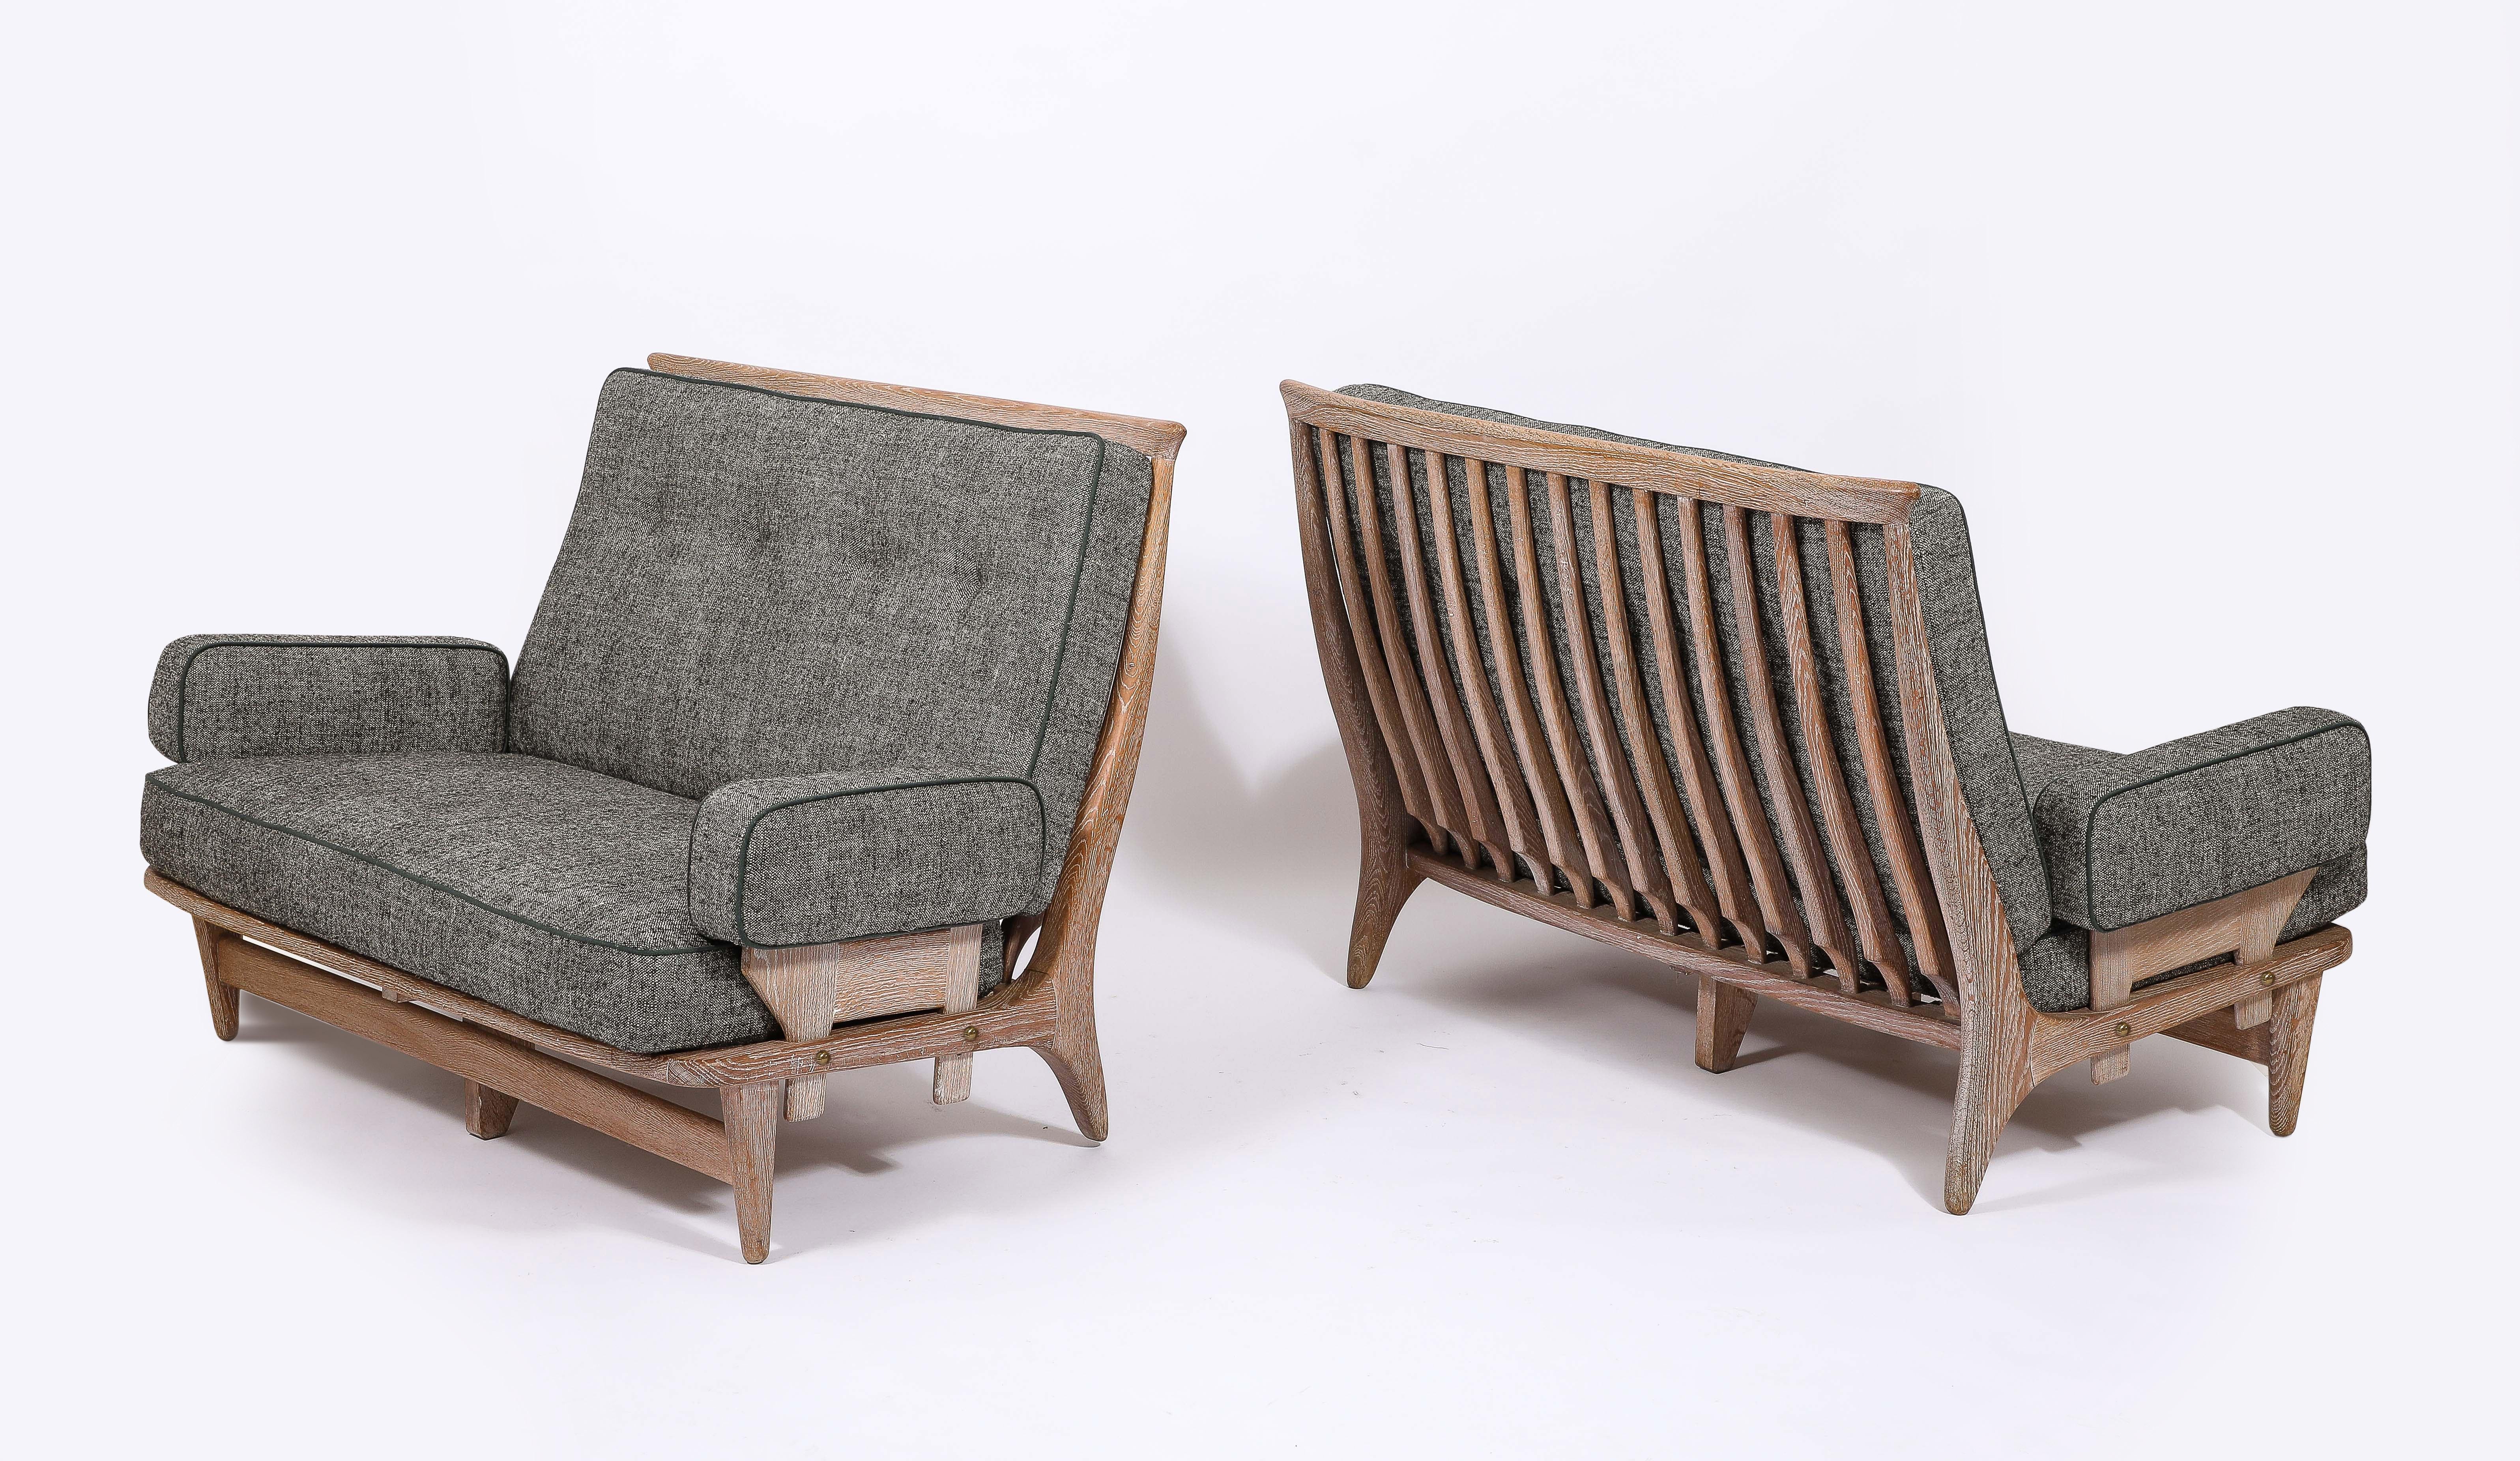 Guillerme & Chambron Settees in Oak, France 1960's For Sale 6